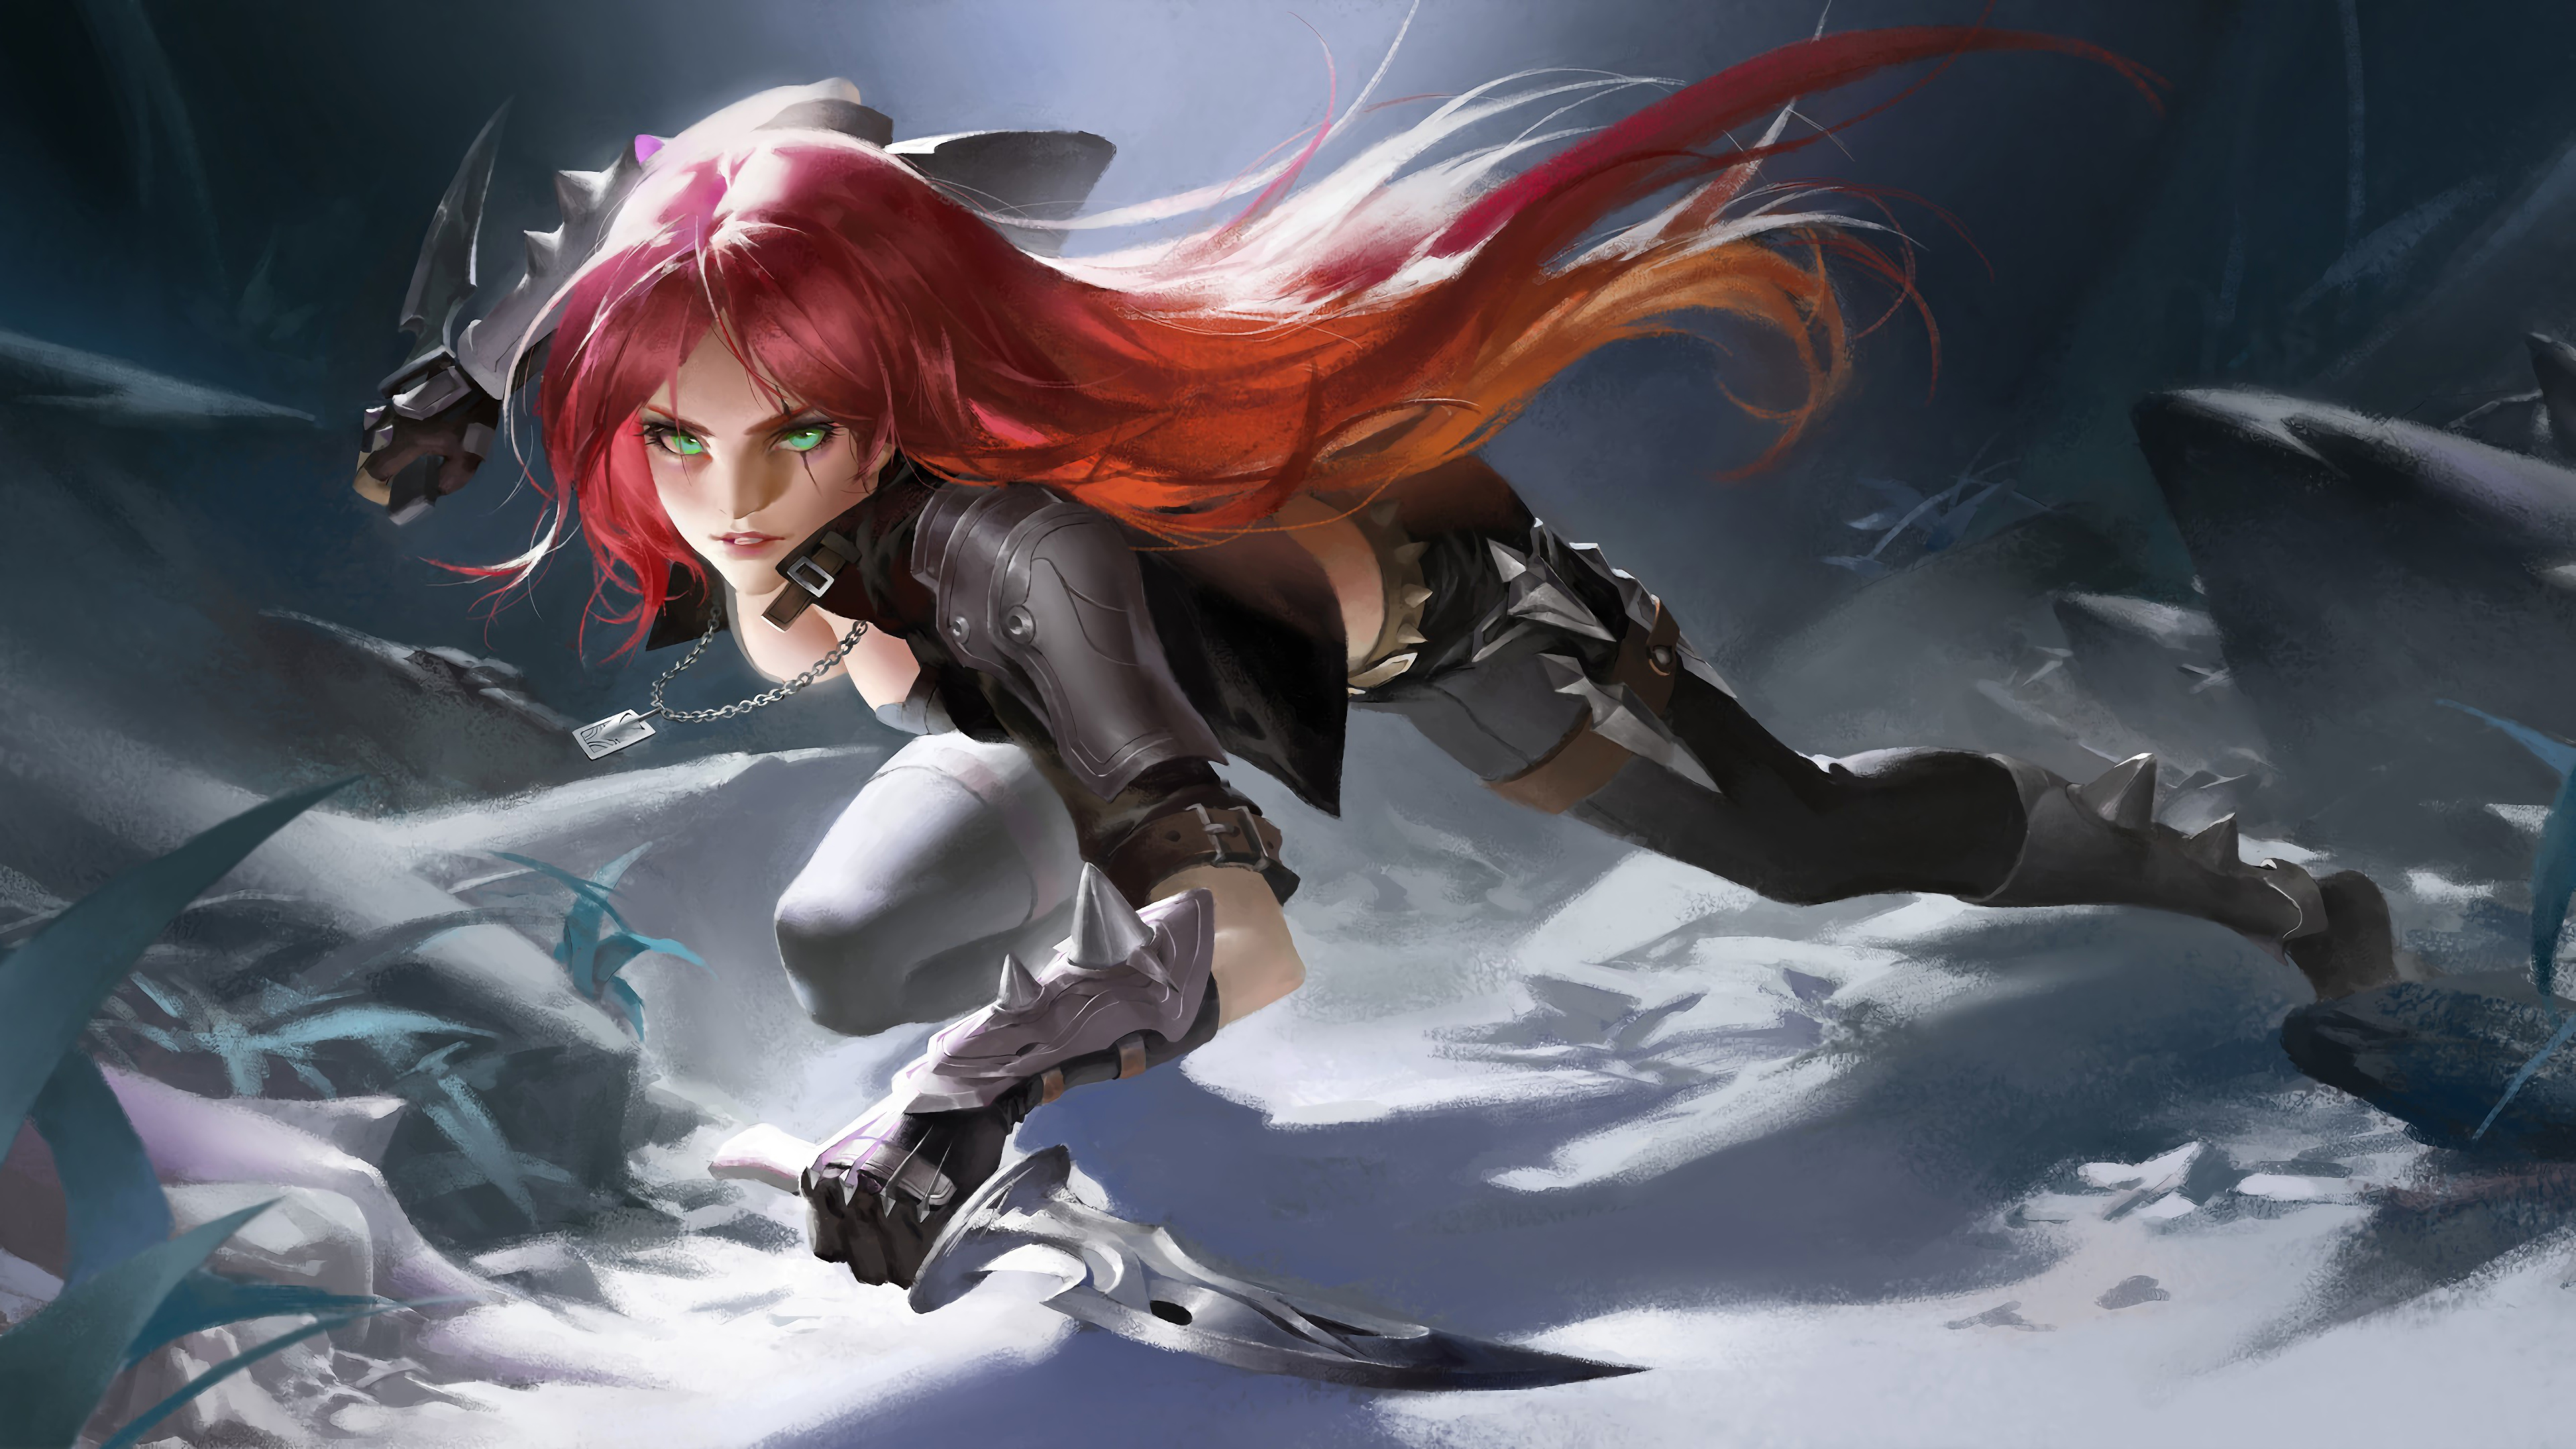 Video Games League Of Legends Katarina Katarina League Of Legends Girl With Weapon Redhead 3840x2160